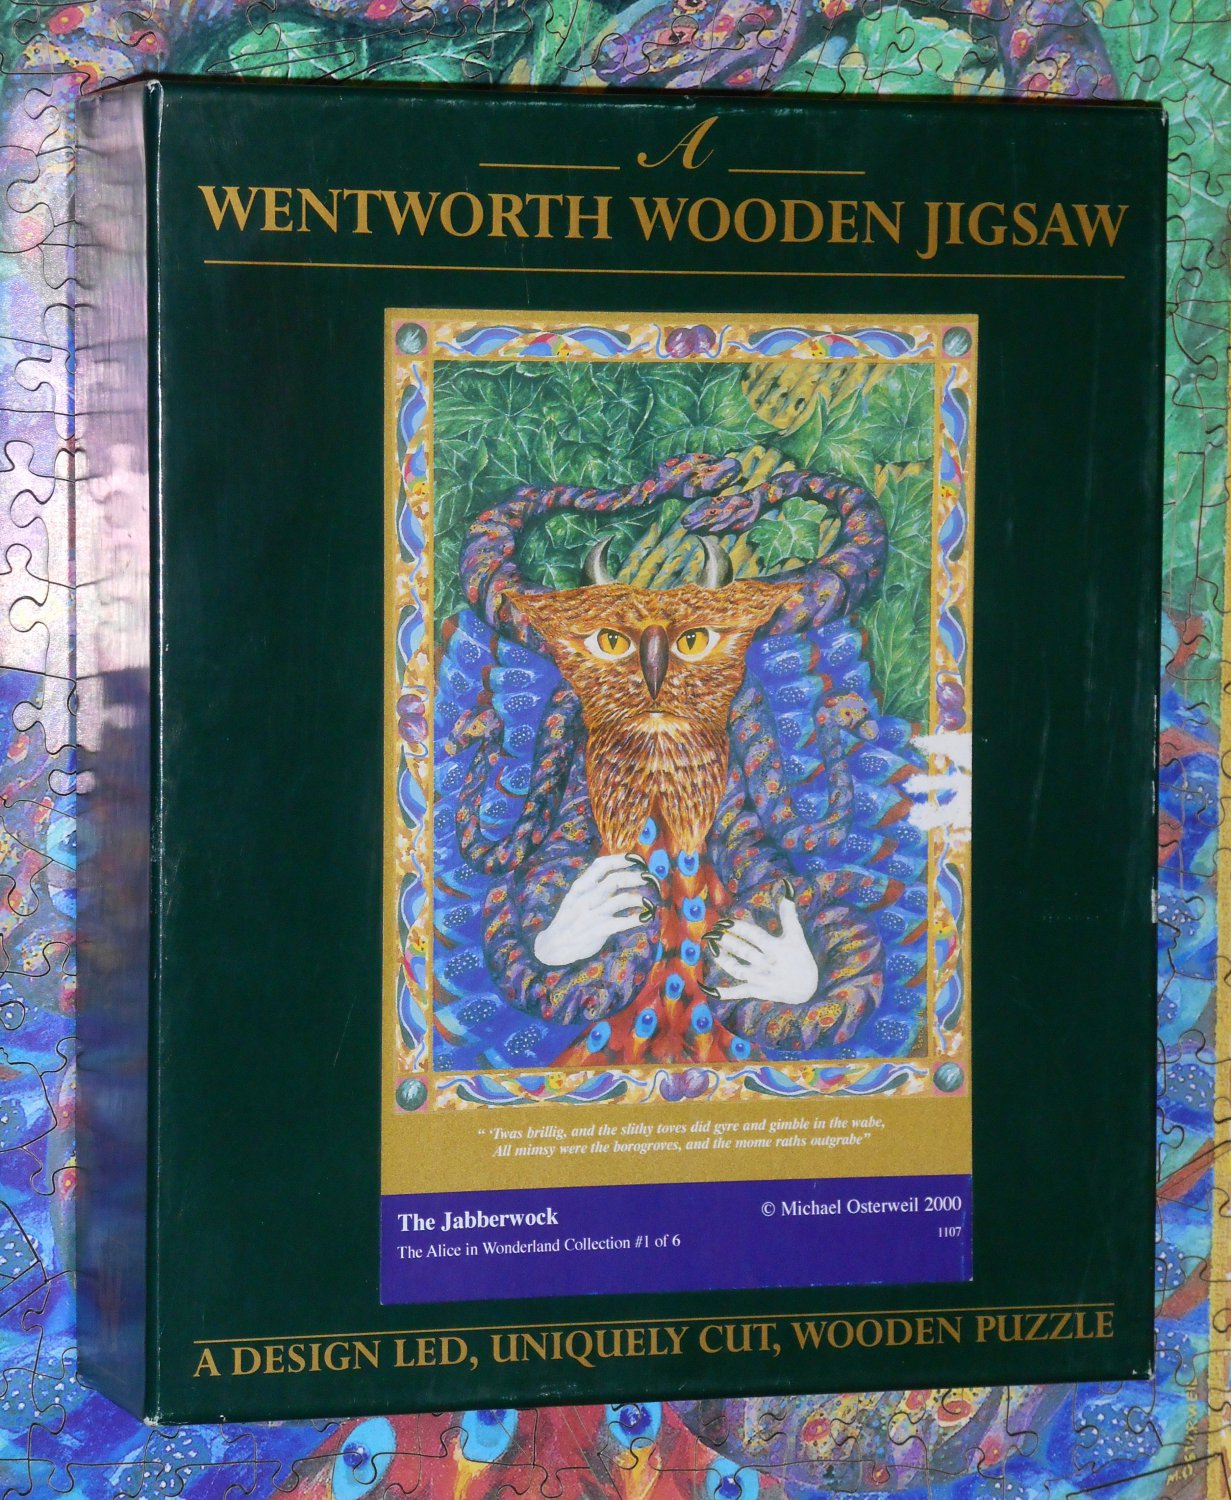 Wentworth 500 Piece Wooden Jigsaw Puzzle The Jabberwock Whimsies Alice